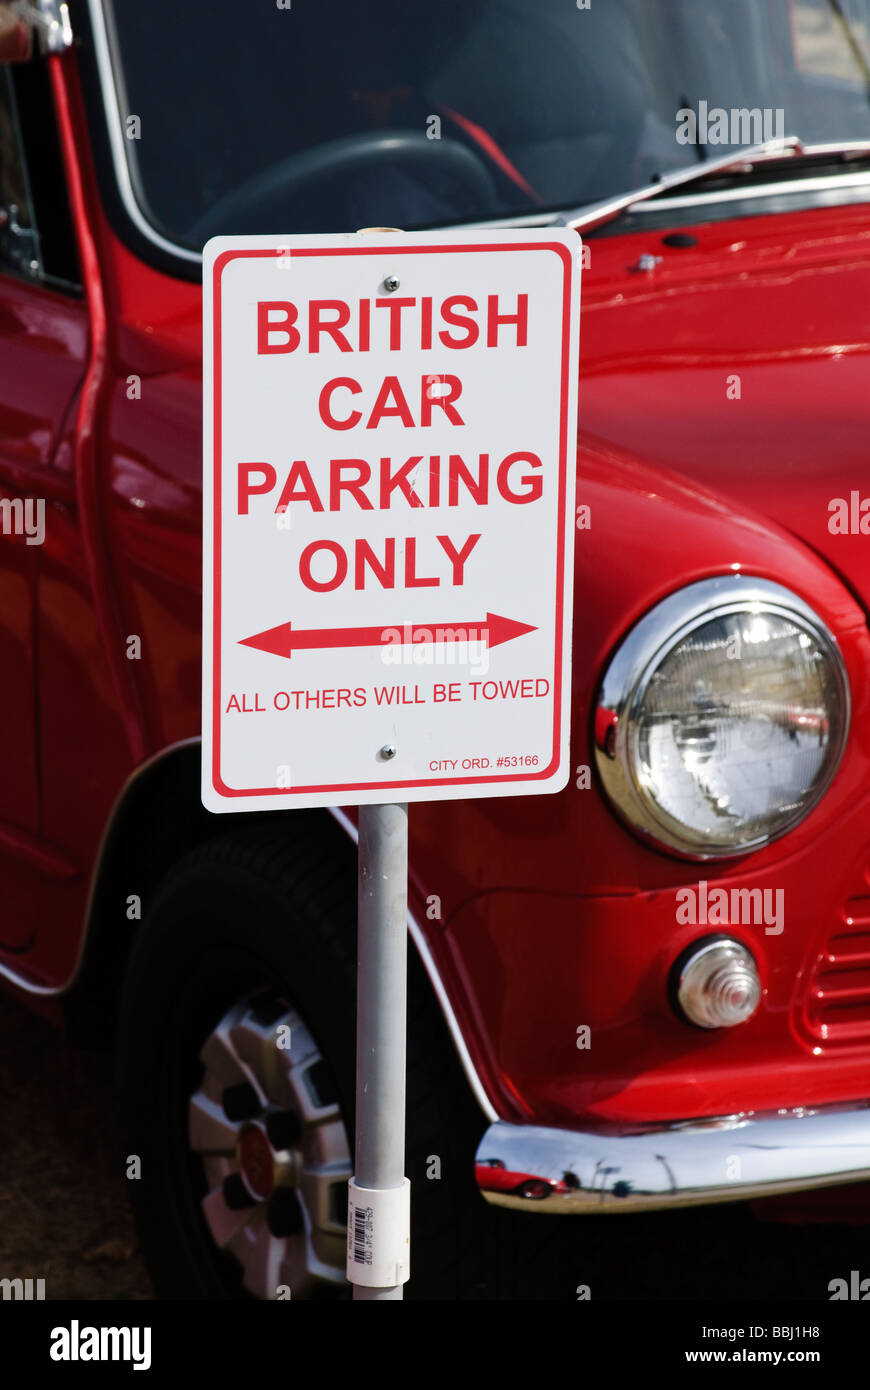 British Car Parking Only sign in front of a red Mini Cooper car Stock Photo